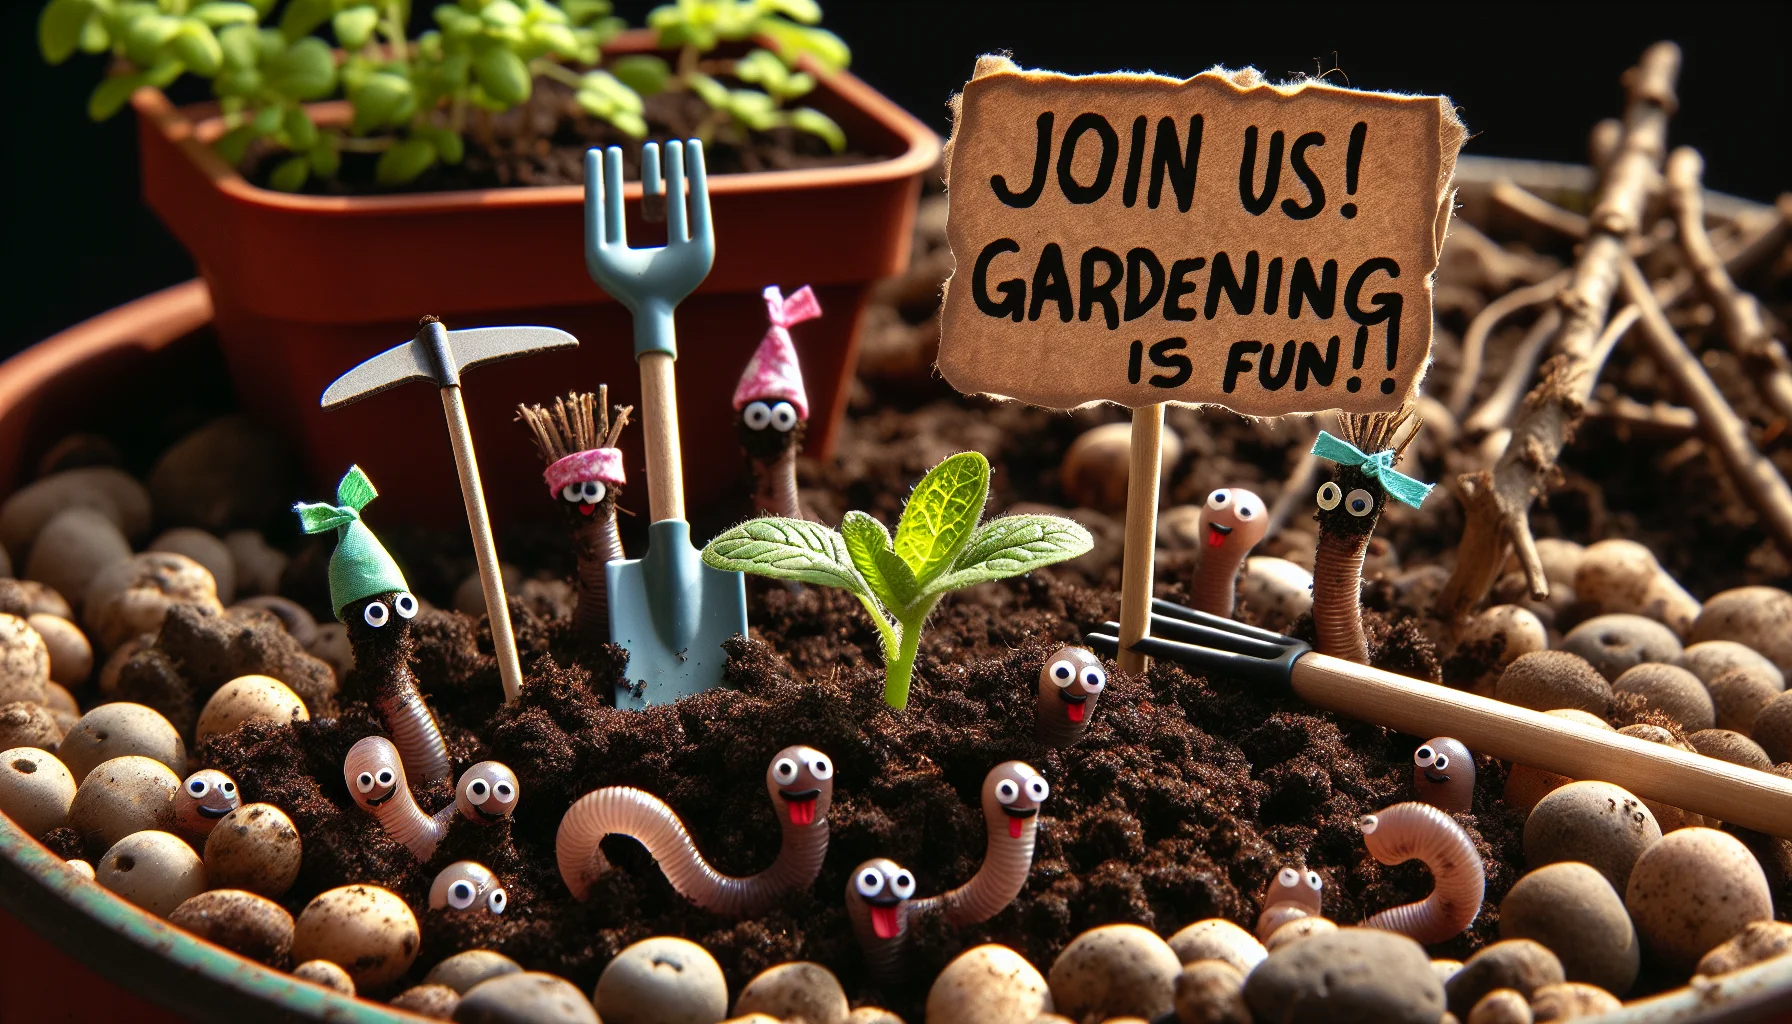 Humorous scene of a garden soil having a small party with mini gardening tools like a rake and spade adorned with tiny bandanas and hats, implying that they're eagerly inviting people to join them in gardening. There are little signs made from twigs and leaves saying 'Join us! Gardening is fun!' Odd-sized worms join the scene with tiny party hats, all are dancing around a plant budding from the nutrient-rich soil, suggesting that the real party begins when the plant grows. The soil itself is teeming with small round pebbles and a healthy brown color indicating a good level of fertility, all under a warmly-lit daylight.